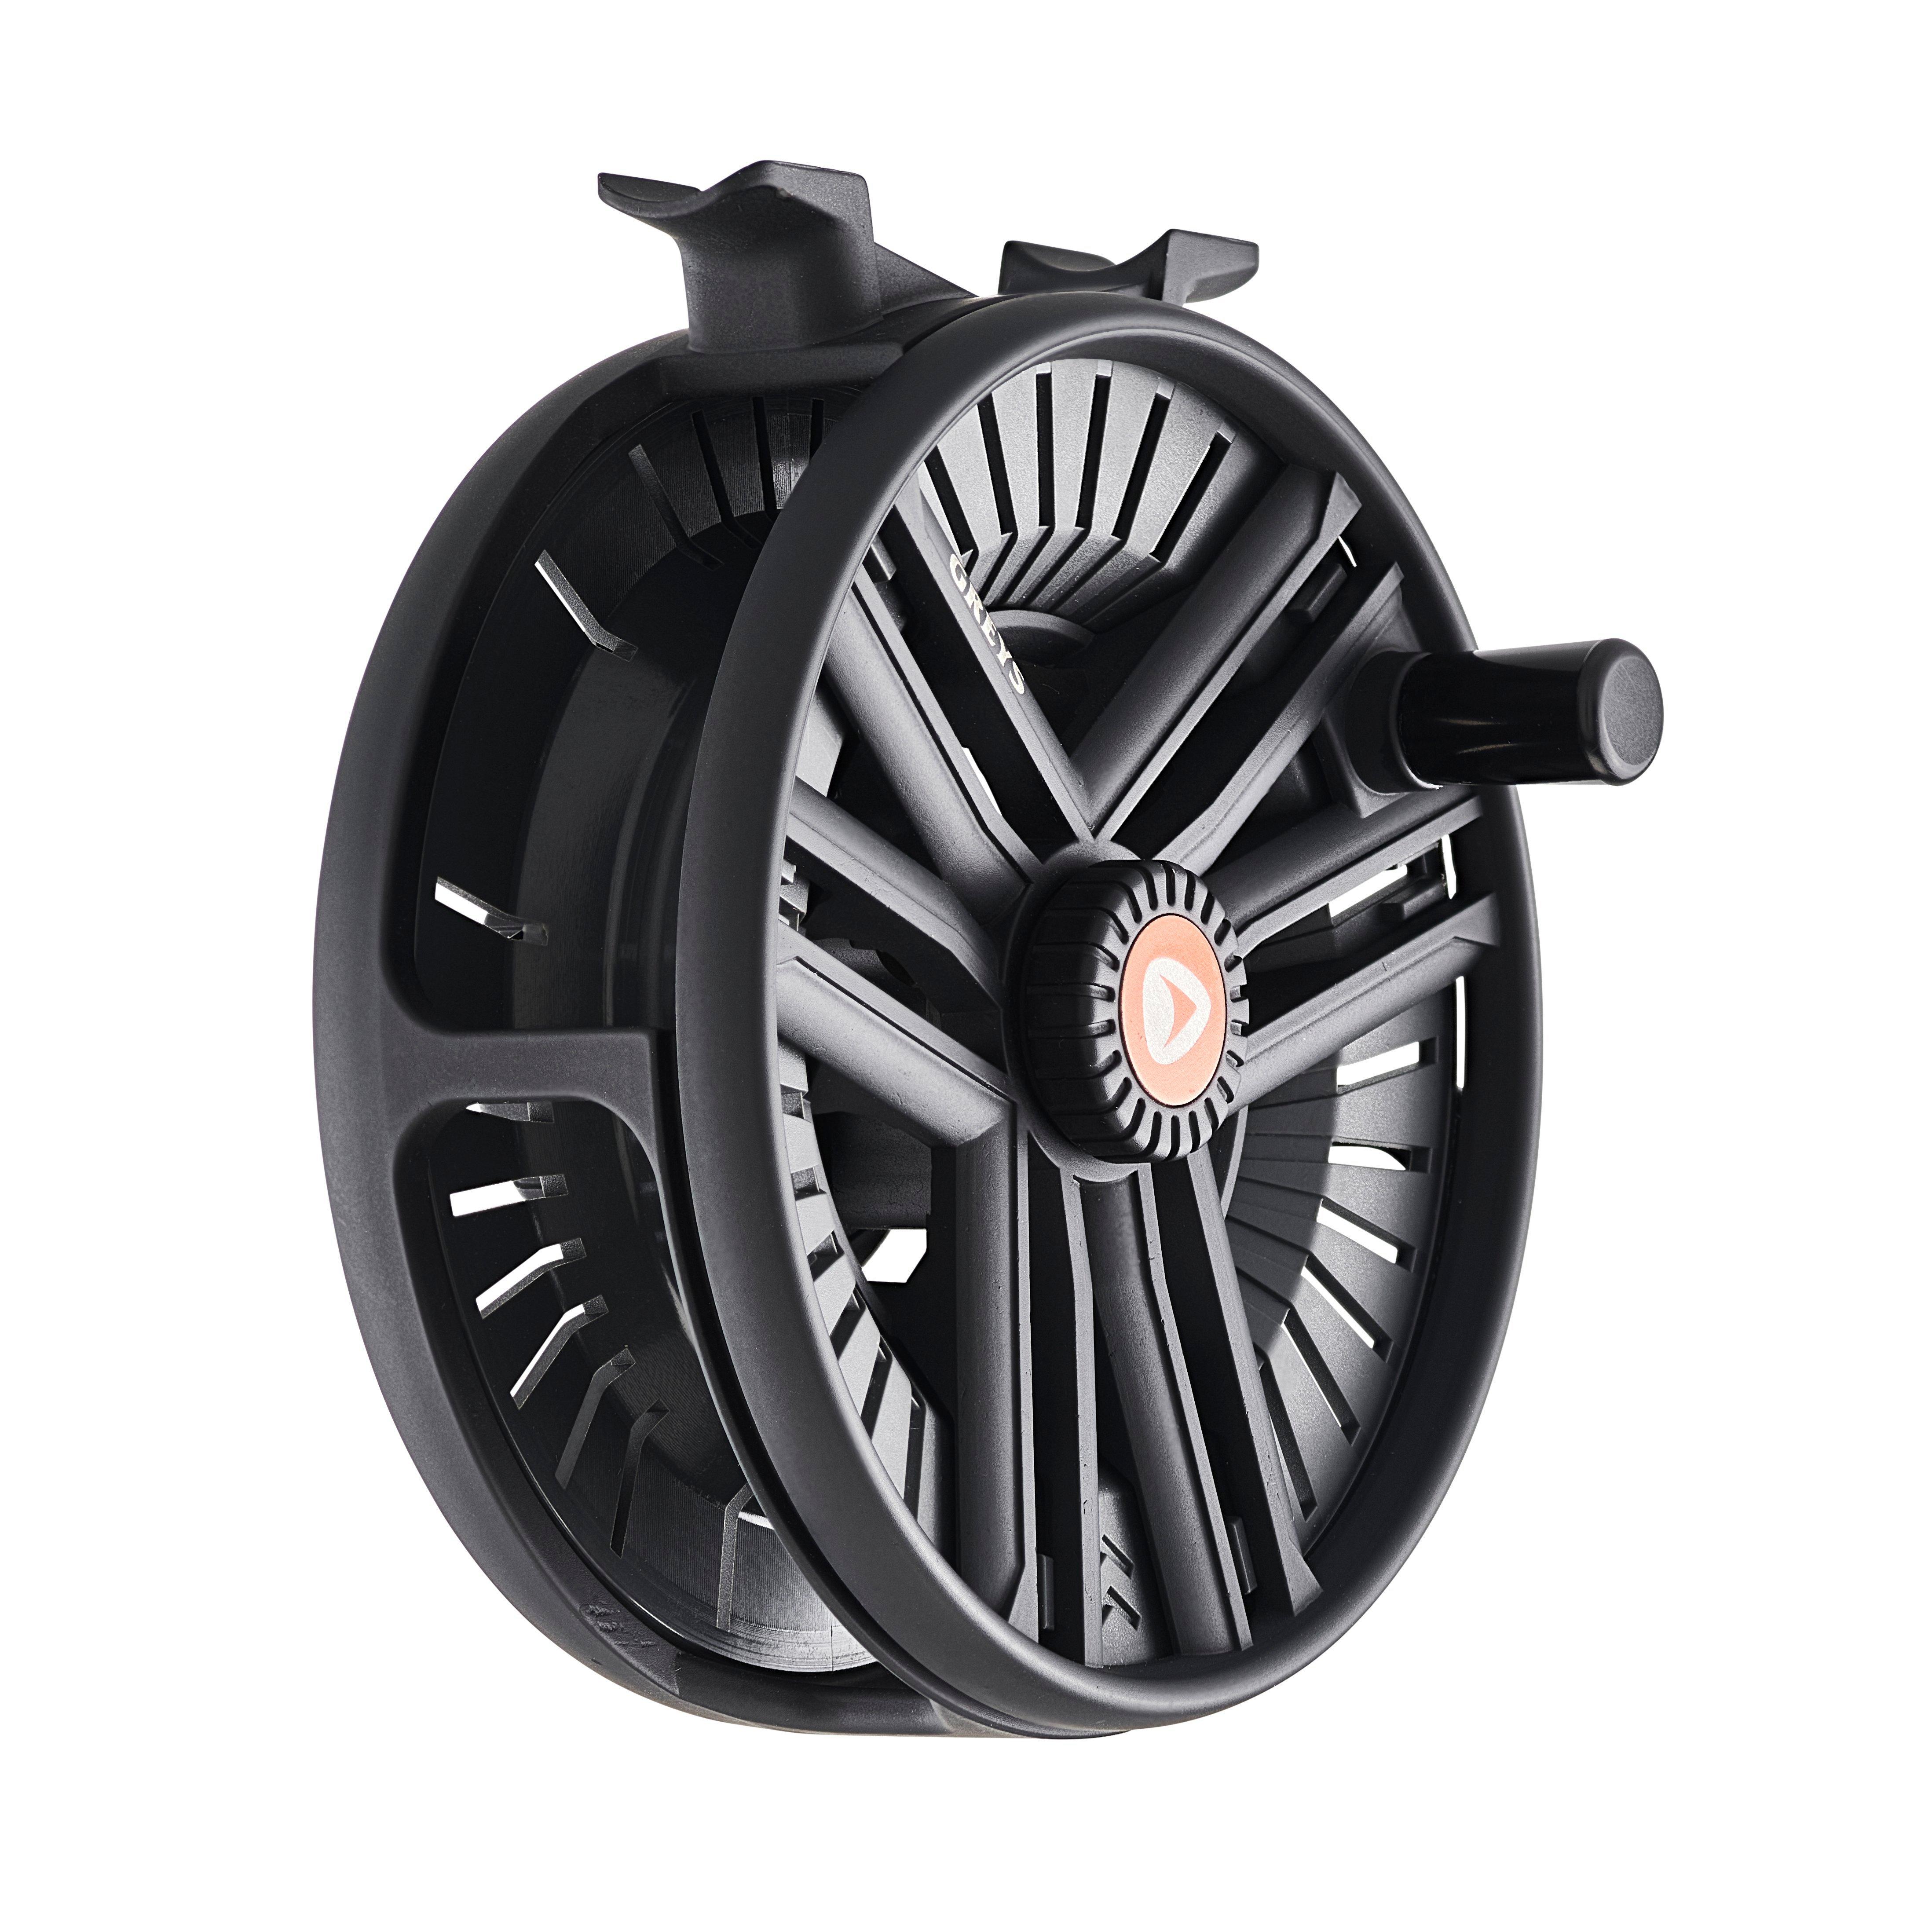 Category: FLY REELS EXTRA SPOOLS